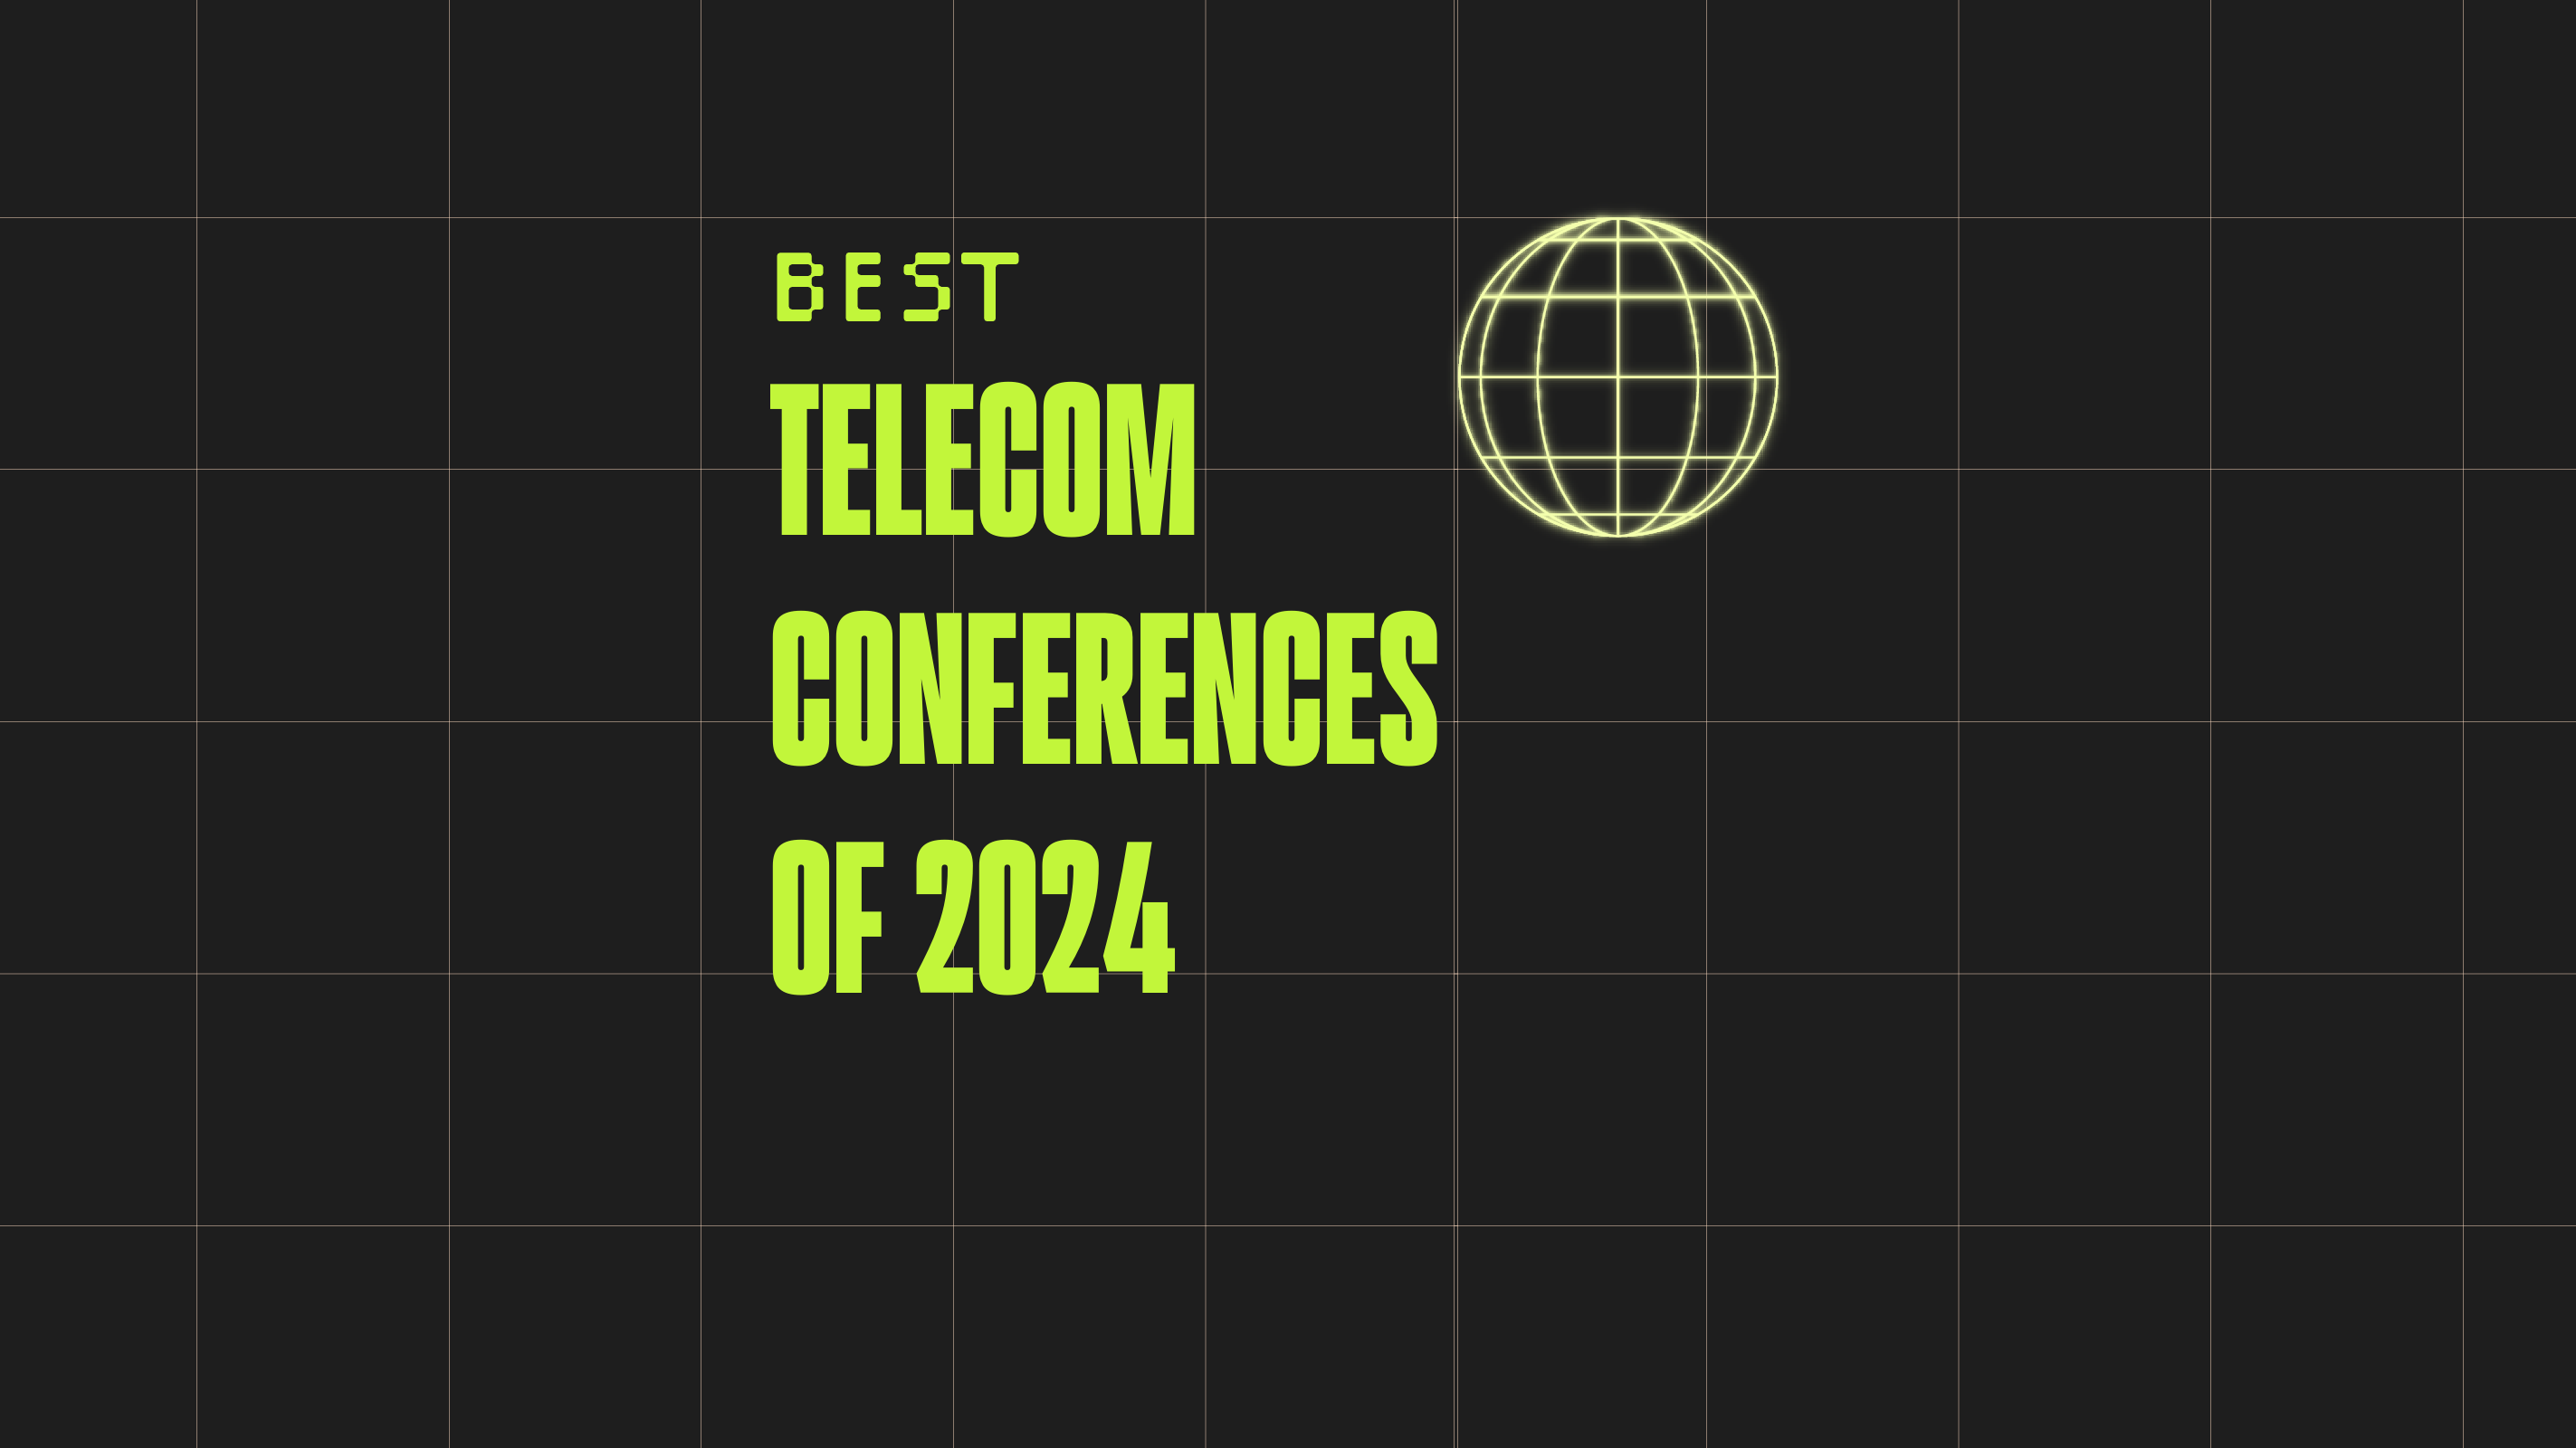 Telecom conferences of 2024 best events